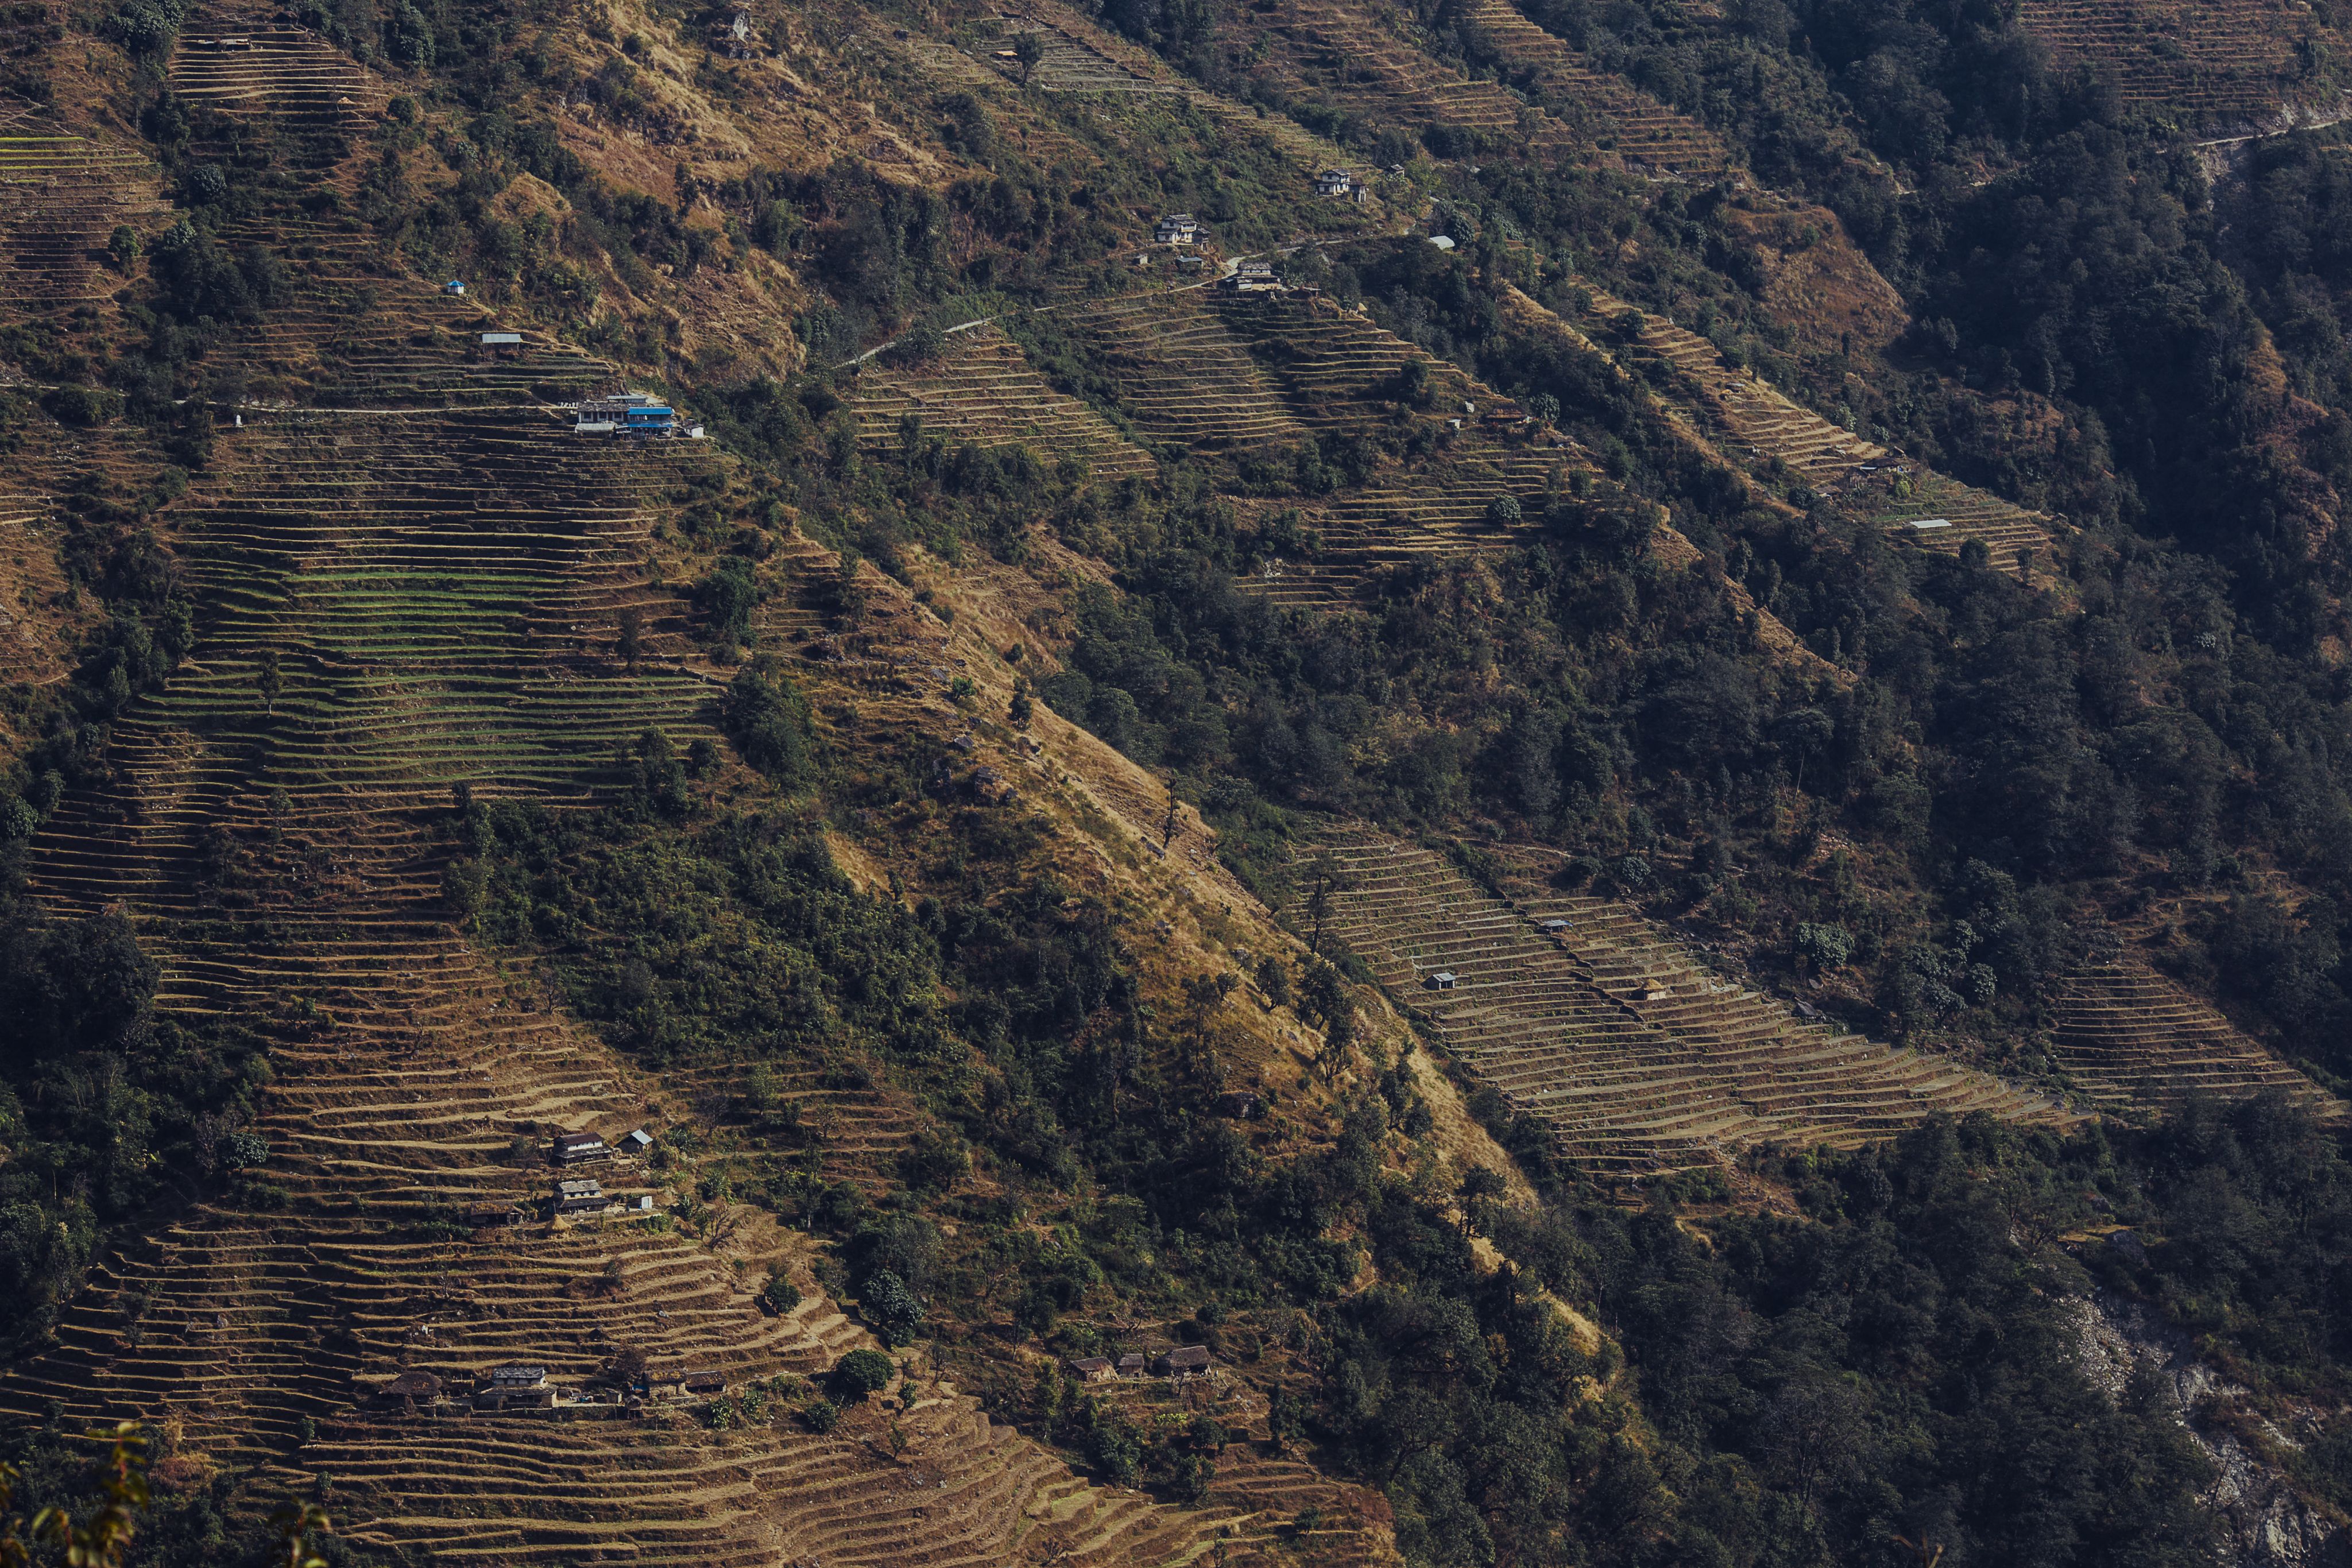 Ripened rice terrHouses, terraces and green forest in the foothills of Nepalaces in Kathmandu Valley, Nepal